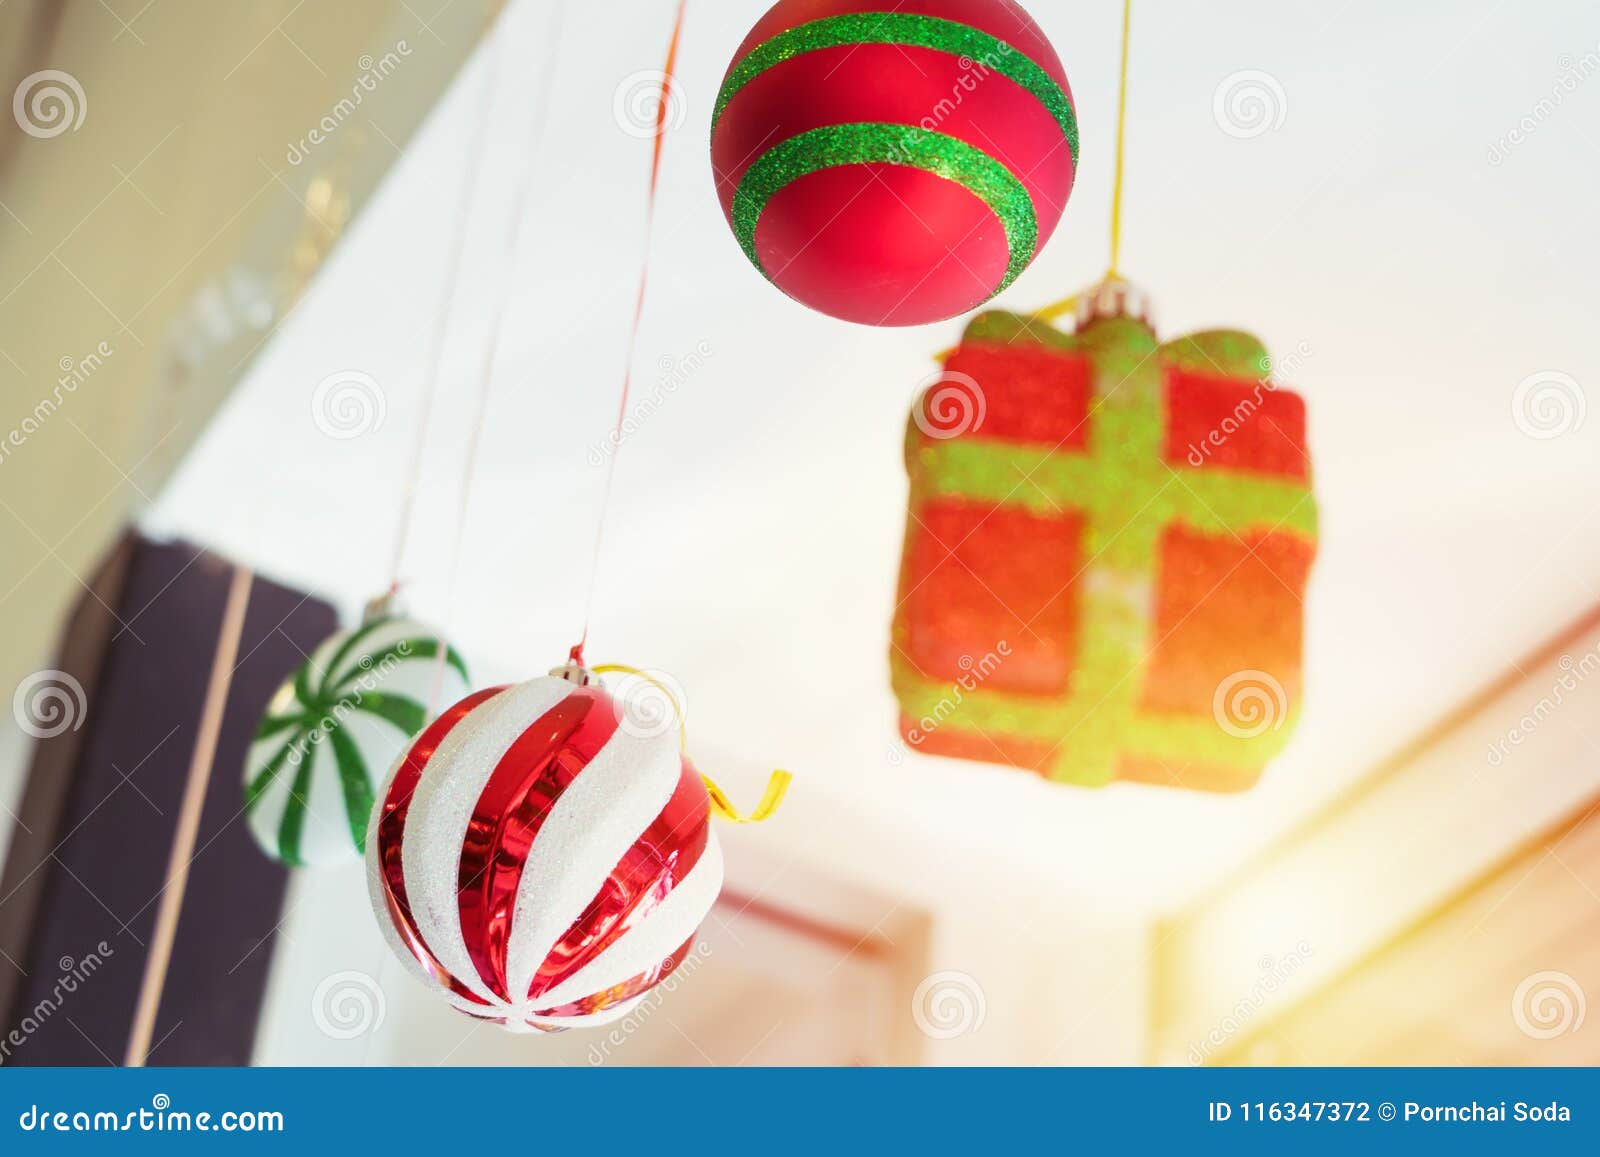 Colorful Ball And Gift Box Mobile Hanging On The Ceiling Stock